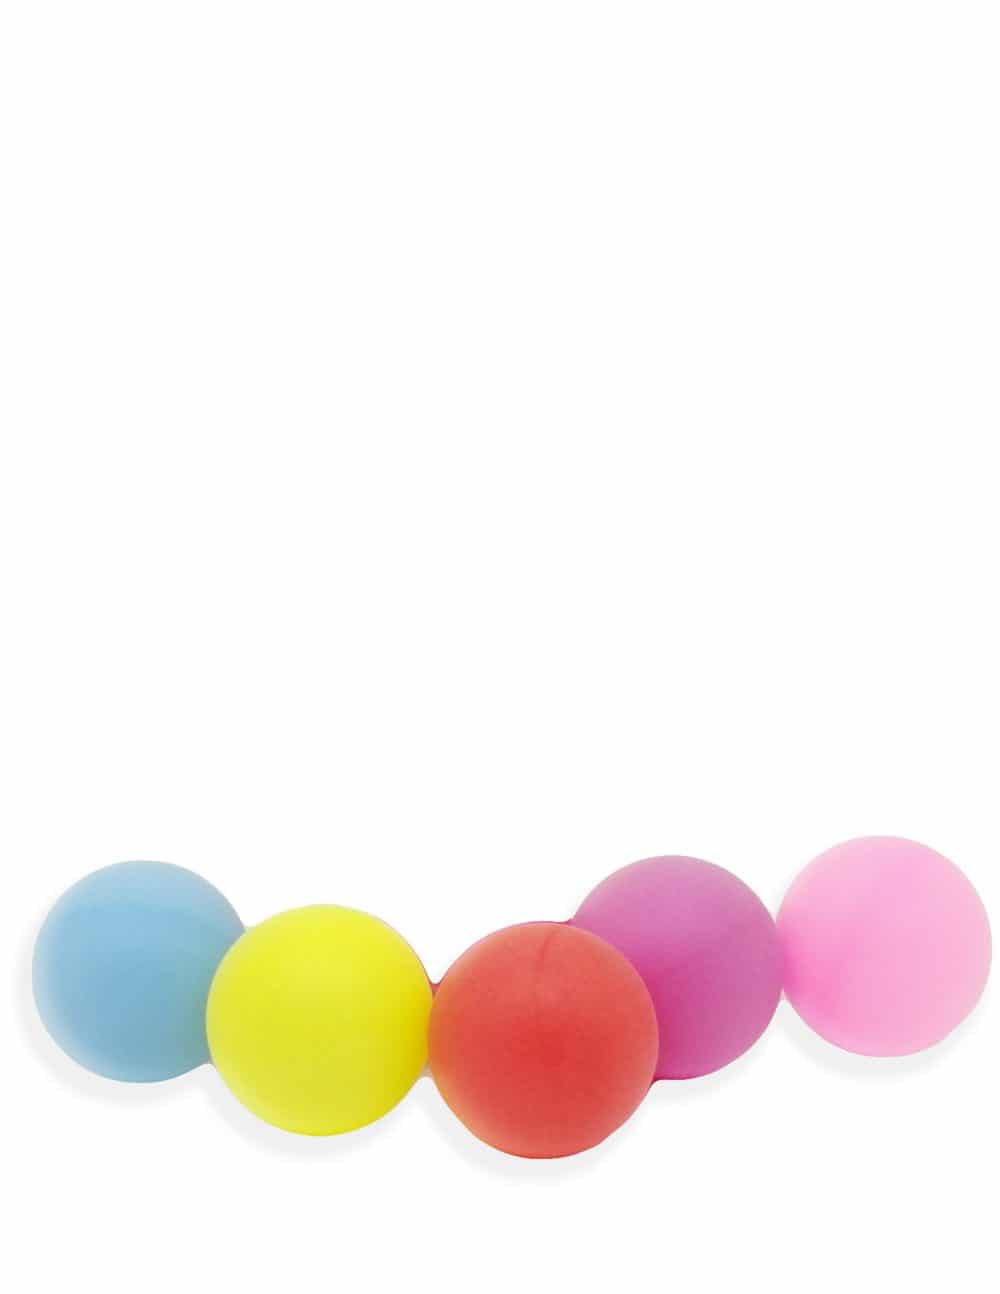 BALL 16277 1.2 1 scaled 1 Ping Pong Ball 5Pcs/Pack